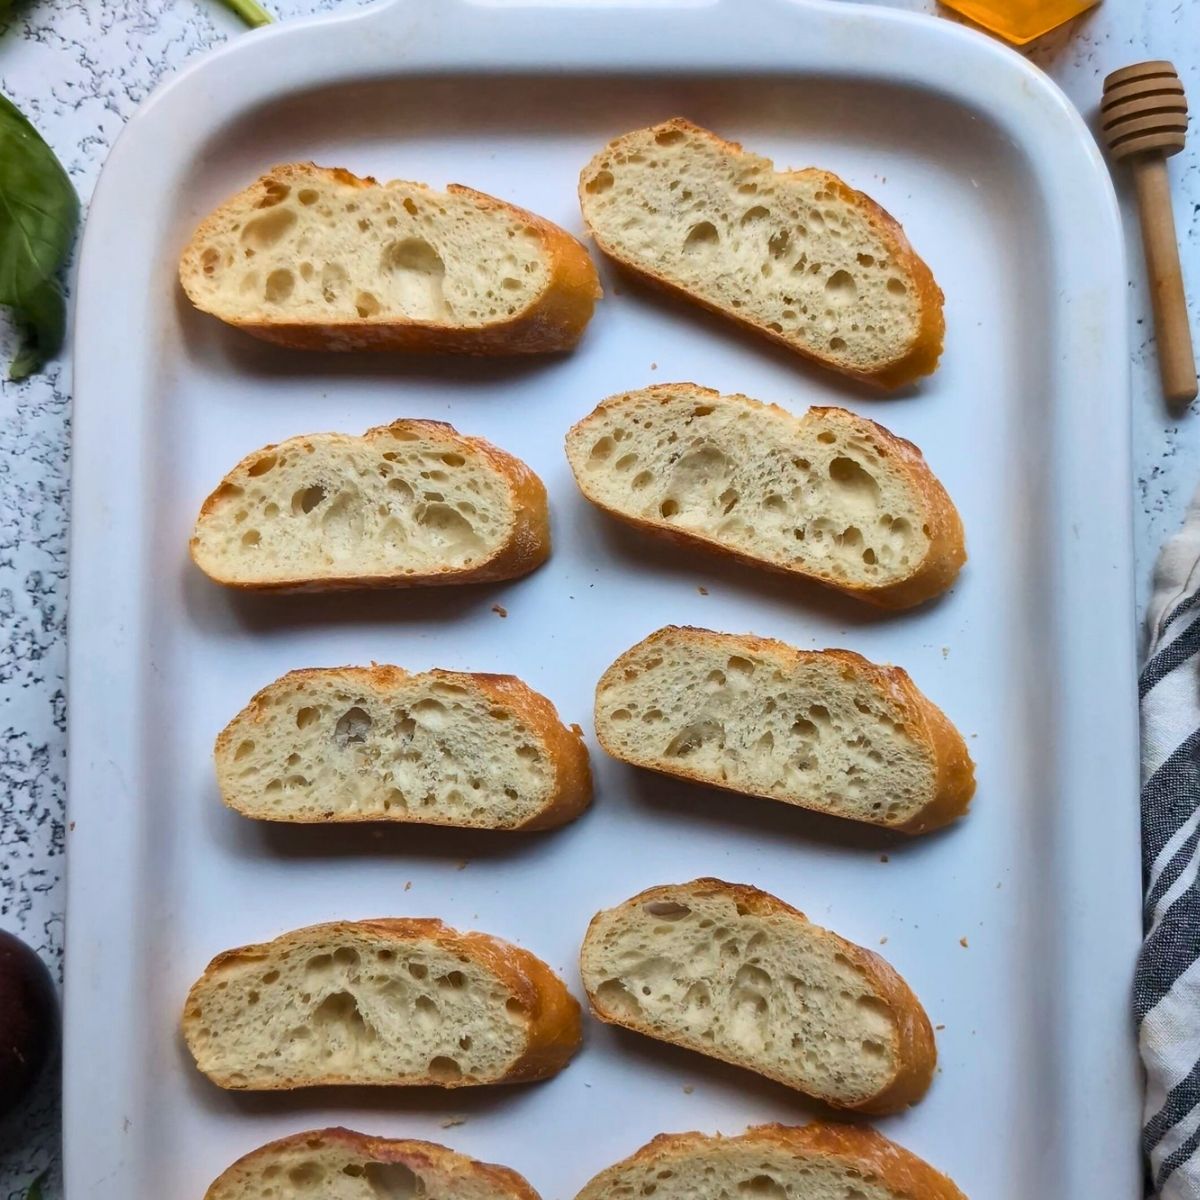 a tray of french baguettes sliced thin and lightly toasted in the oven.